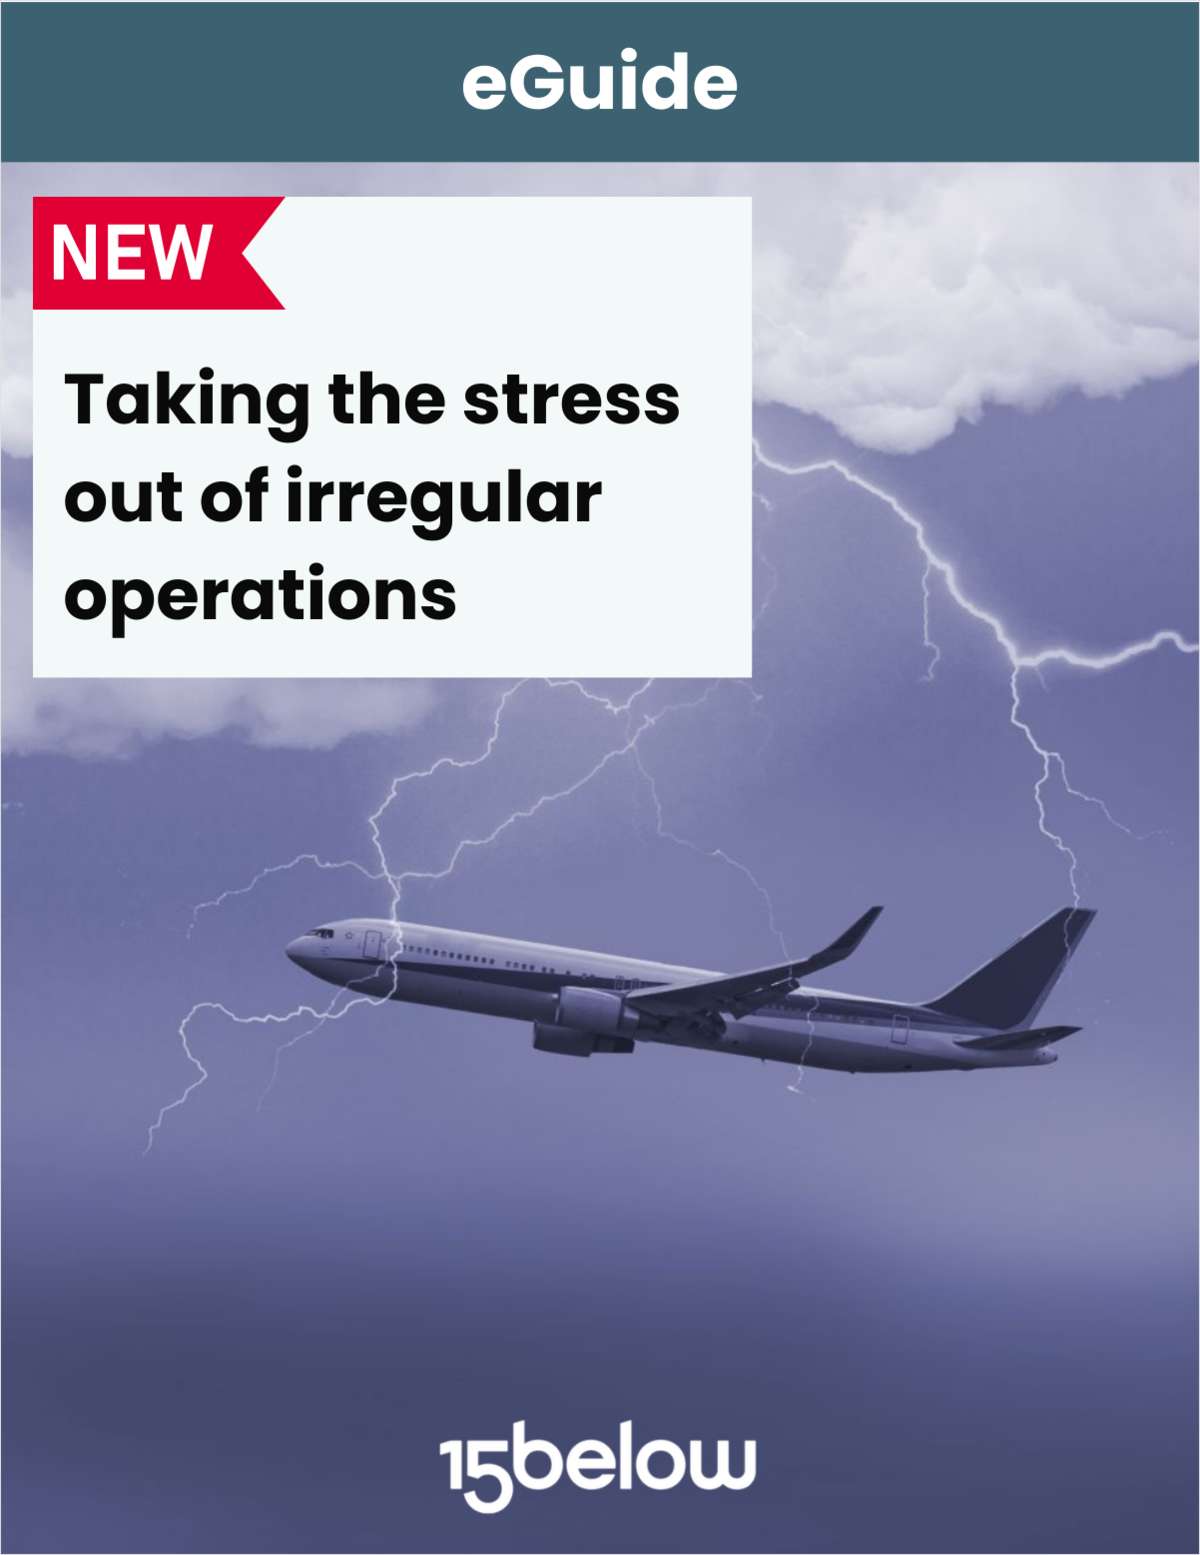 Taking the stress out of irregular operations for airlines